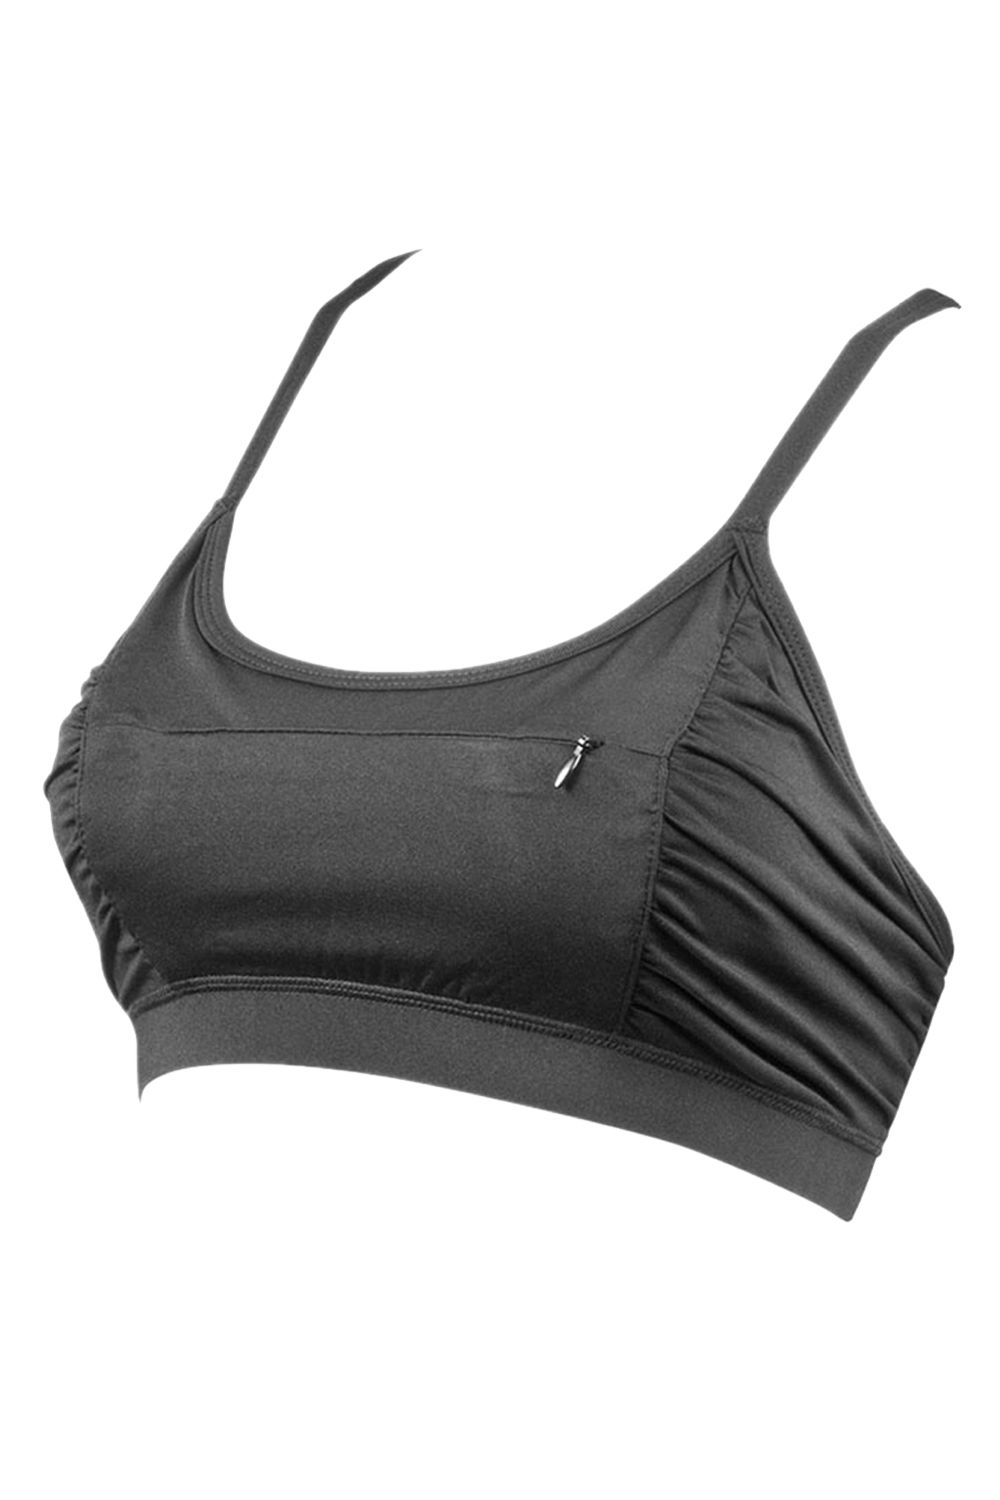 6 Sports Bras with Pockets for Your iPhone - 6 Sports Bras That Have Pockets  for Your Phone